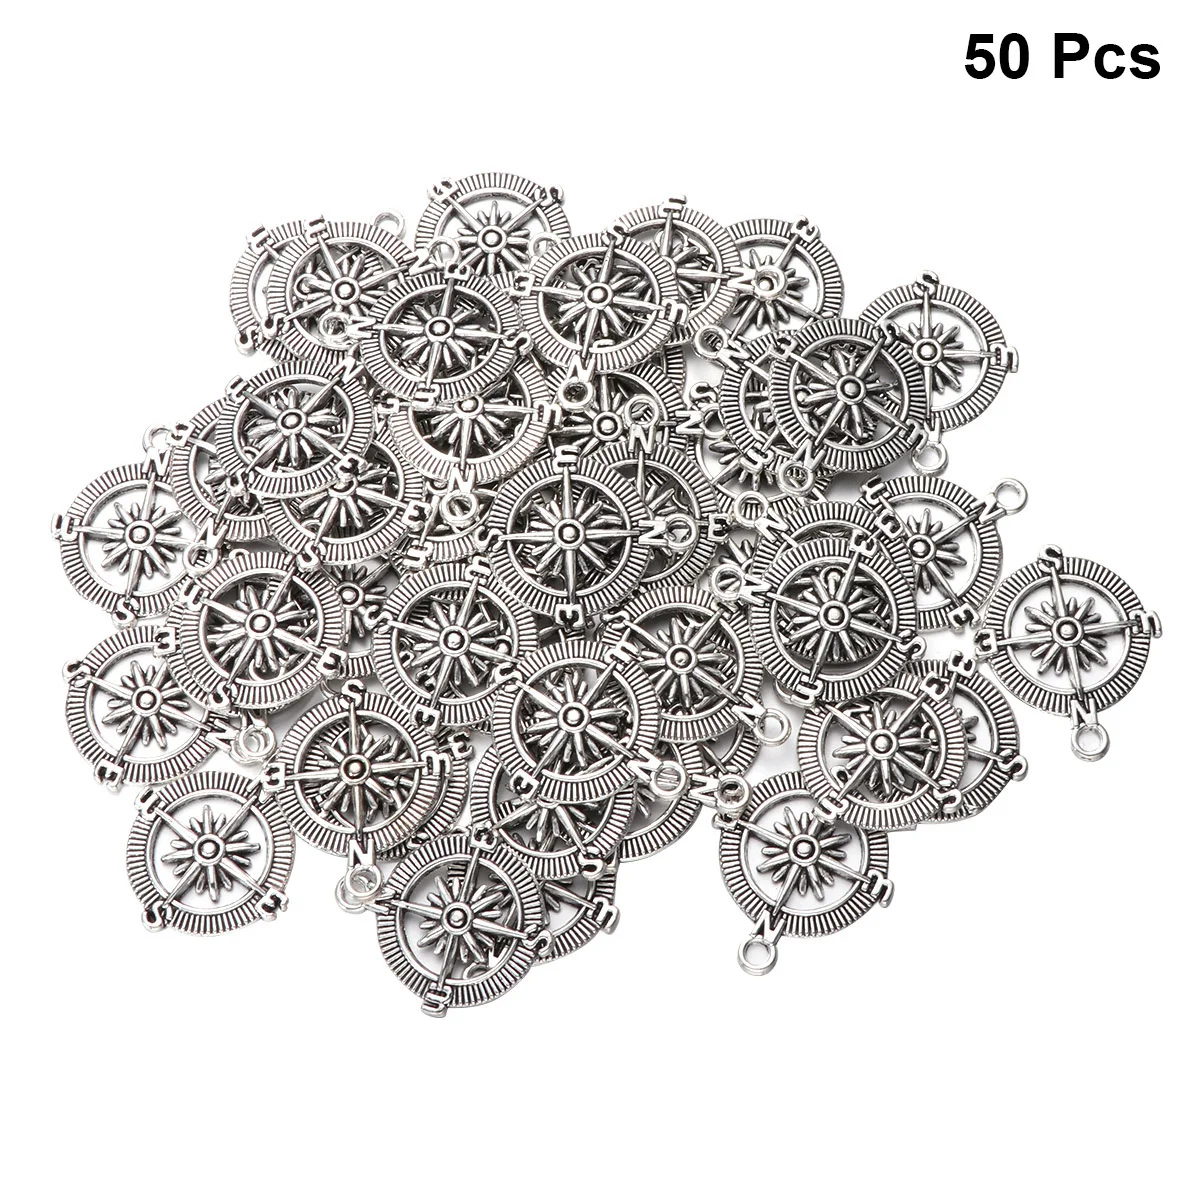 

50 Pcs Silver Bangles Alloy Pendant Charm Polished Necklace DIY Compass Shaped Charms Women's